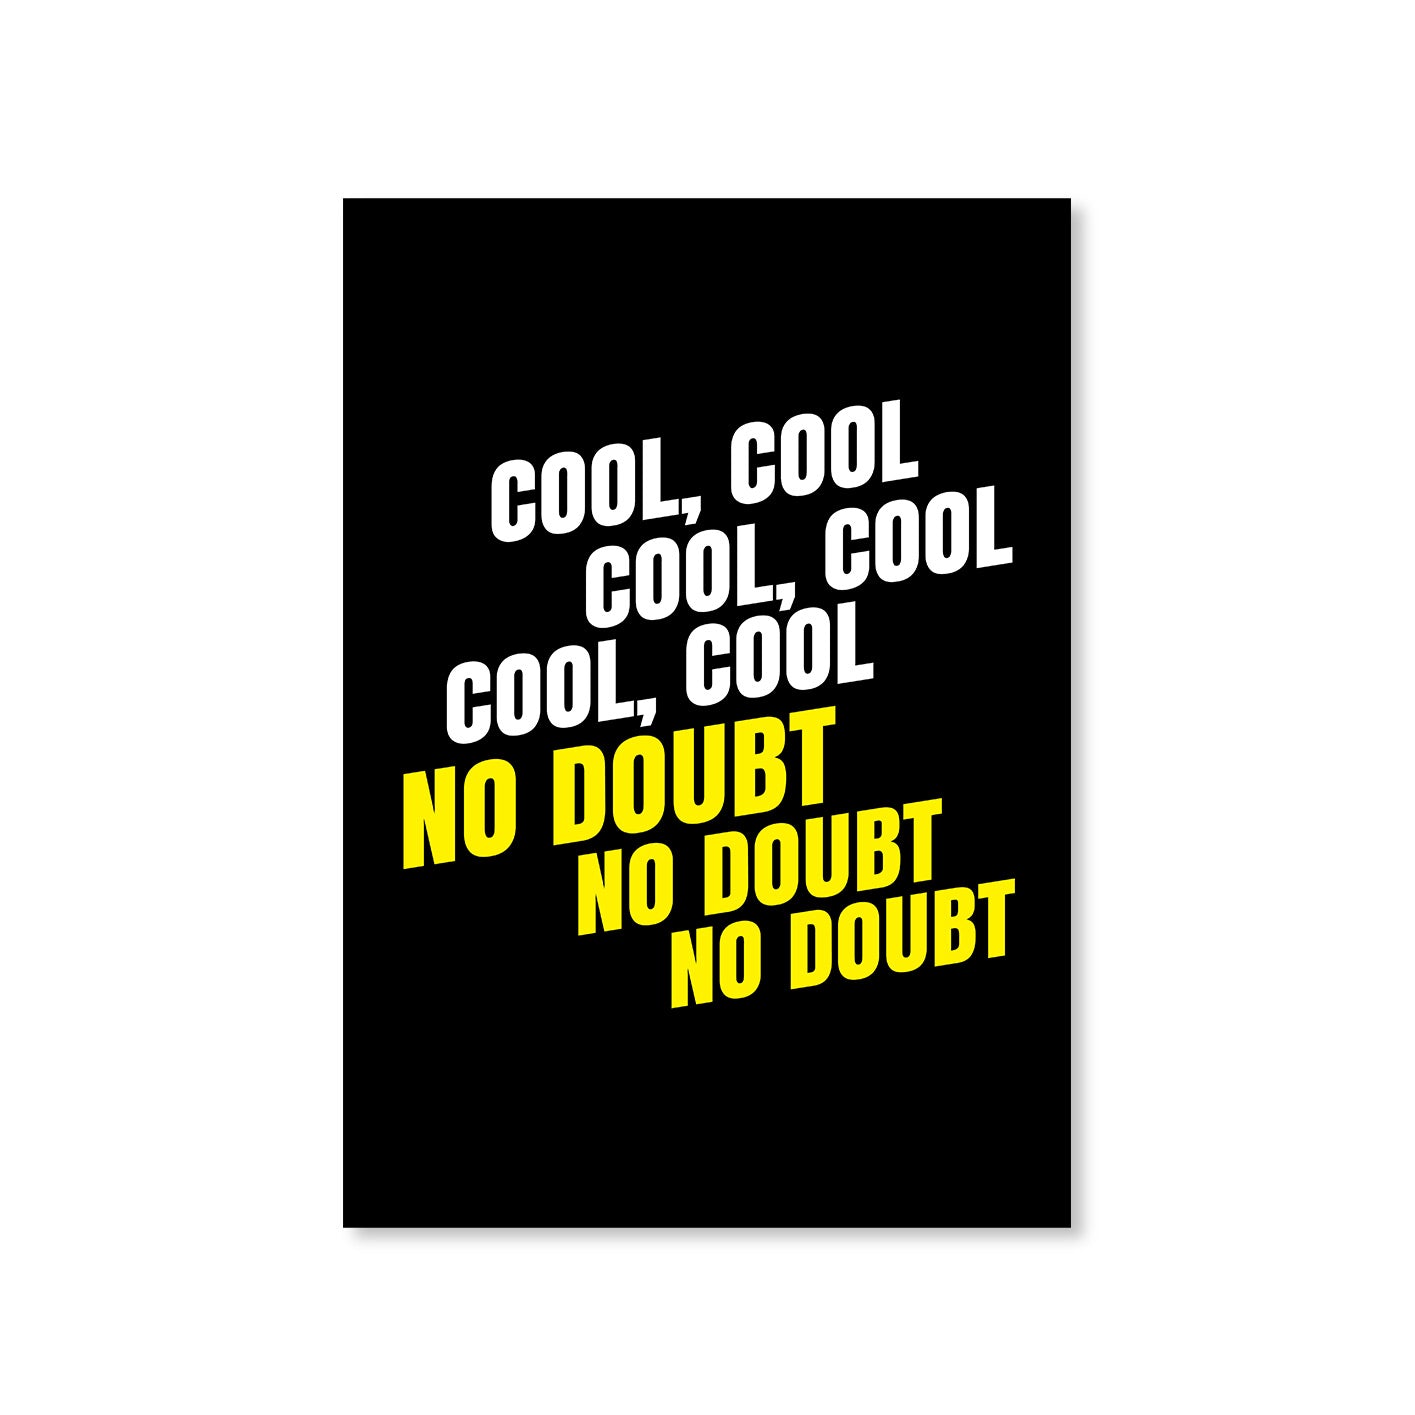 brooklyn nine-nine cool cool cool no doubt no doubt no doubt poster wall art buy online united states of america usa the banyan tee tbt a4 detective jake peralta terry charles boyle gina linetti andy samberg merchandise clothing acceessories